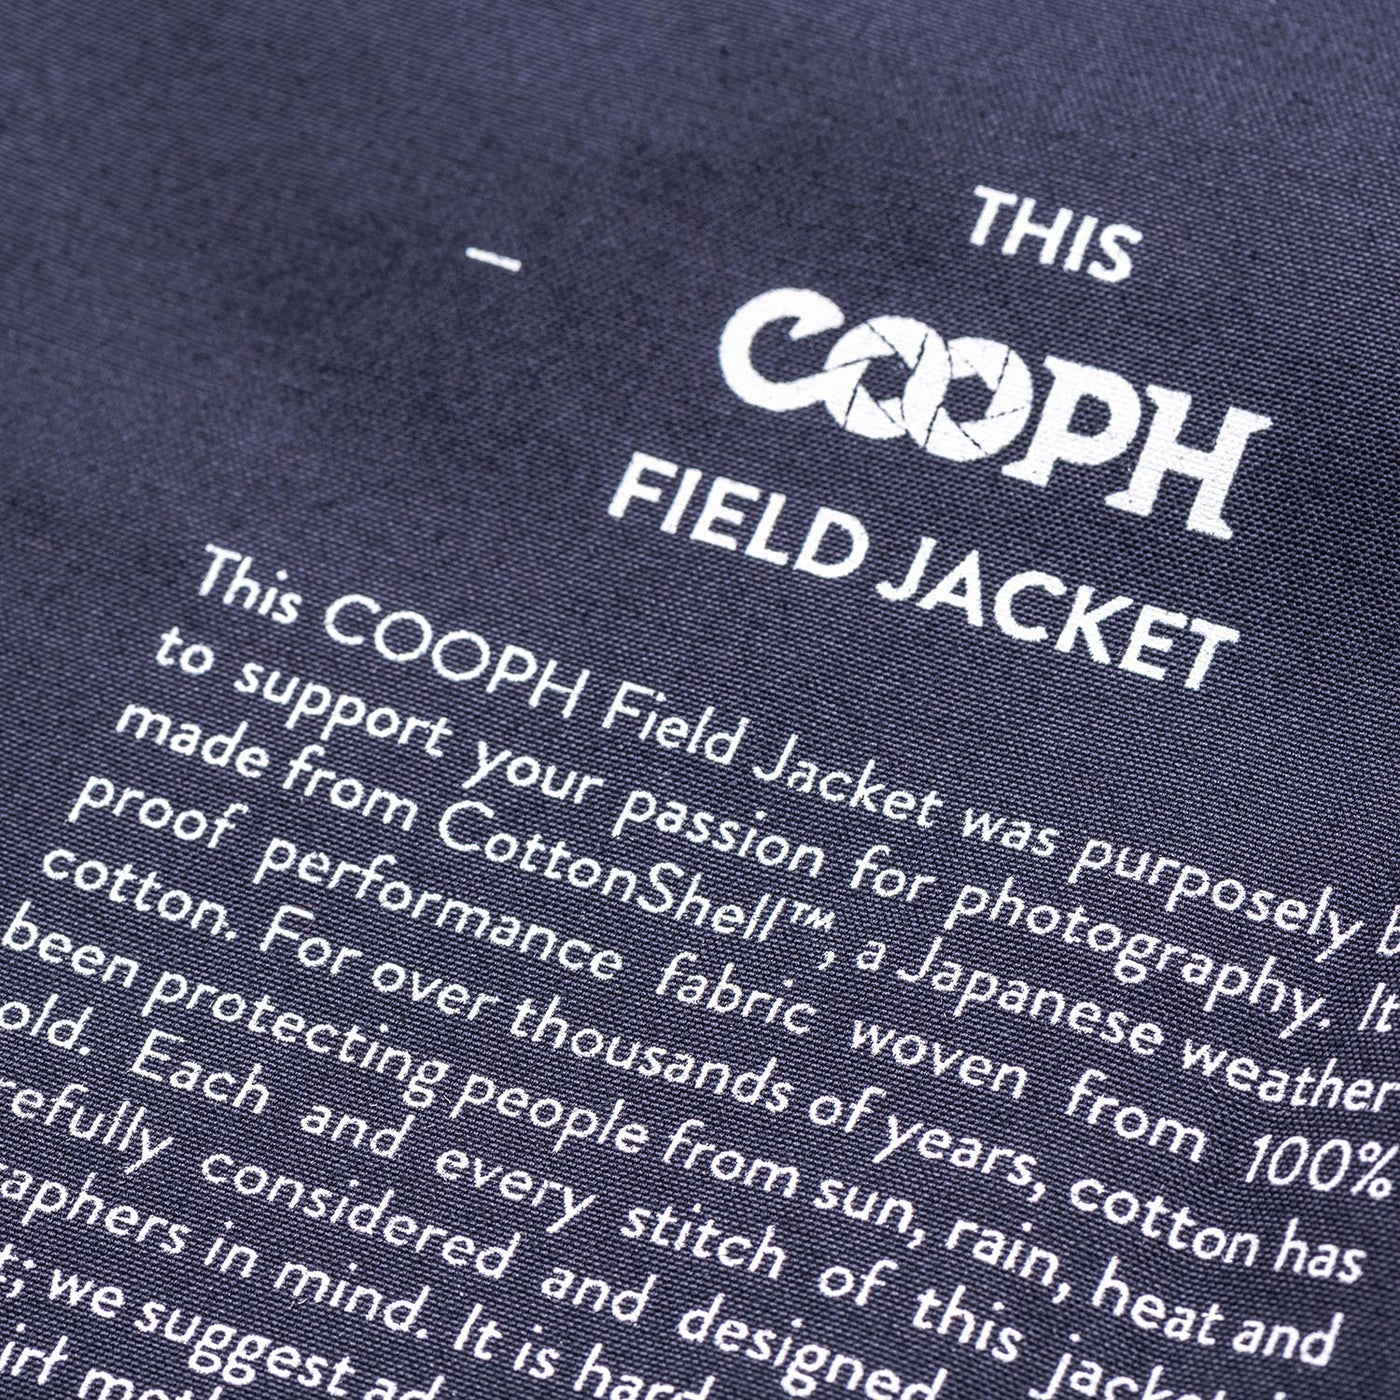 the inside label of the field jacket  